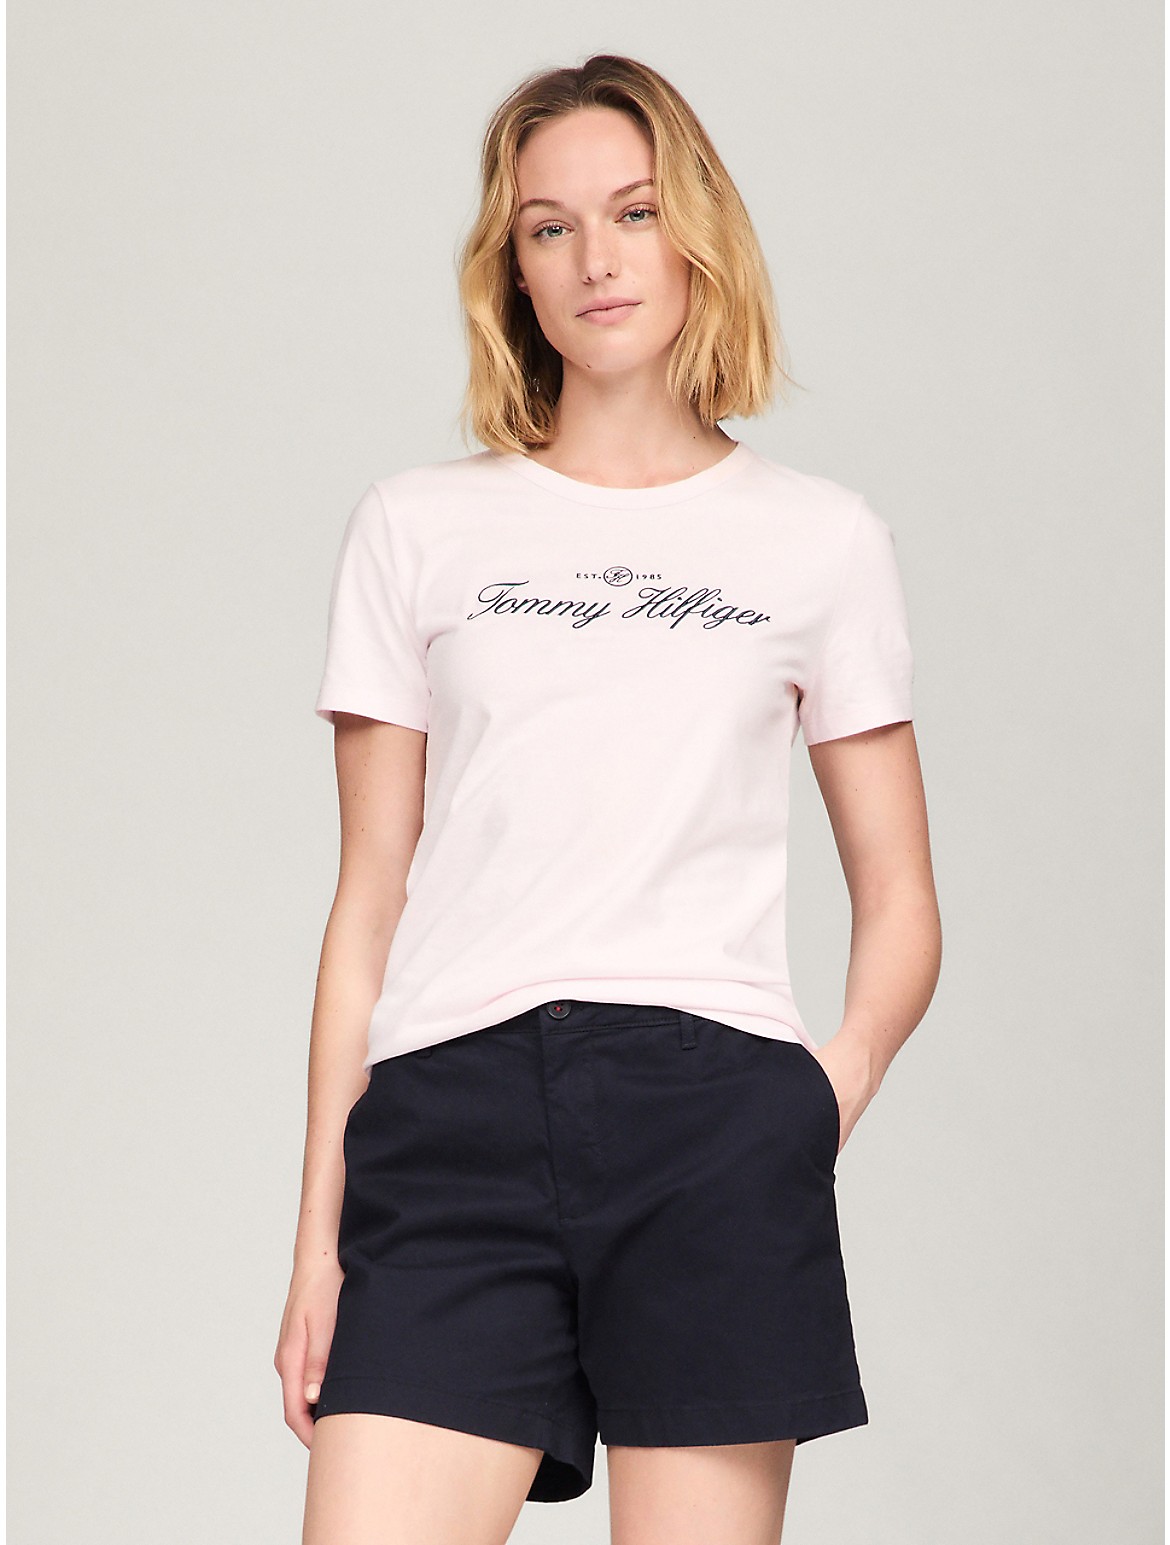 Tommy Hilfiger Women's Slim Fit Embroidered Signature T-Shirt